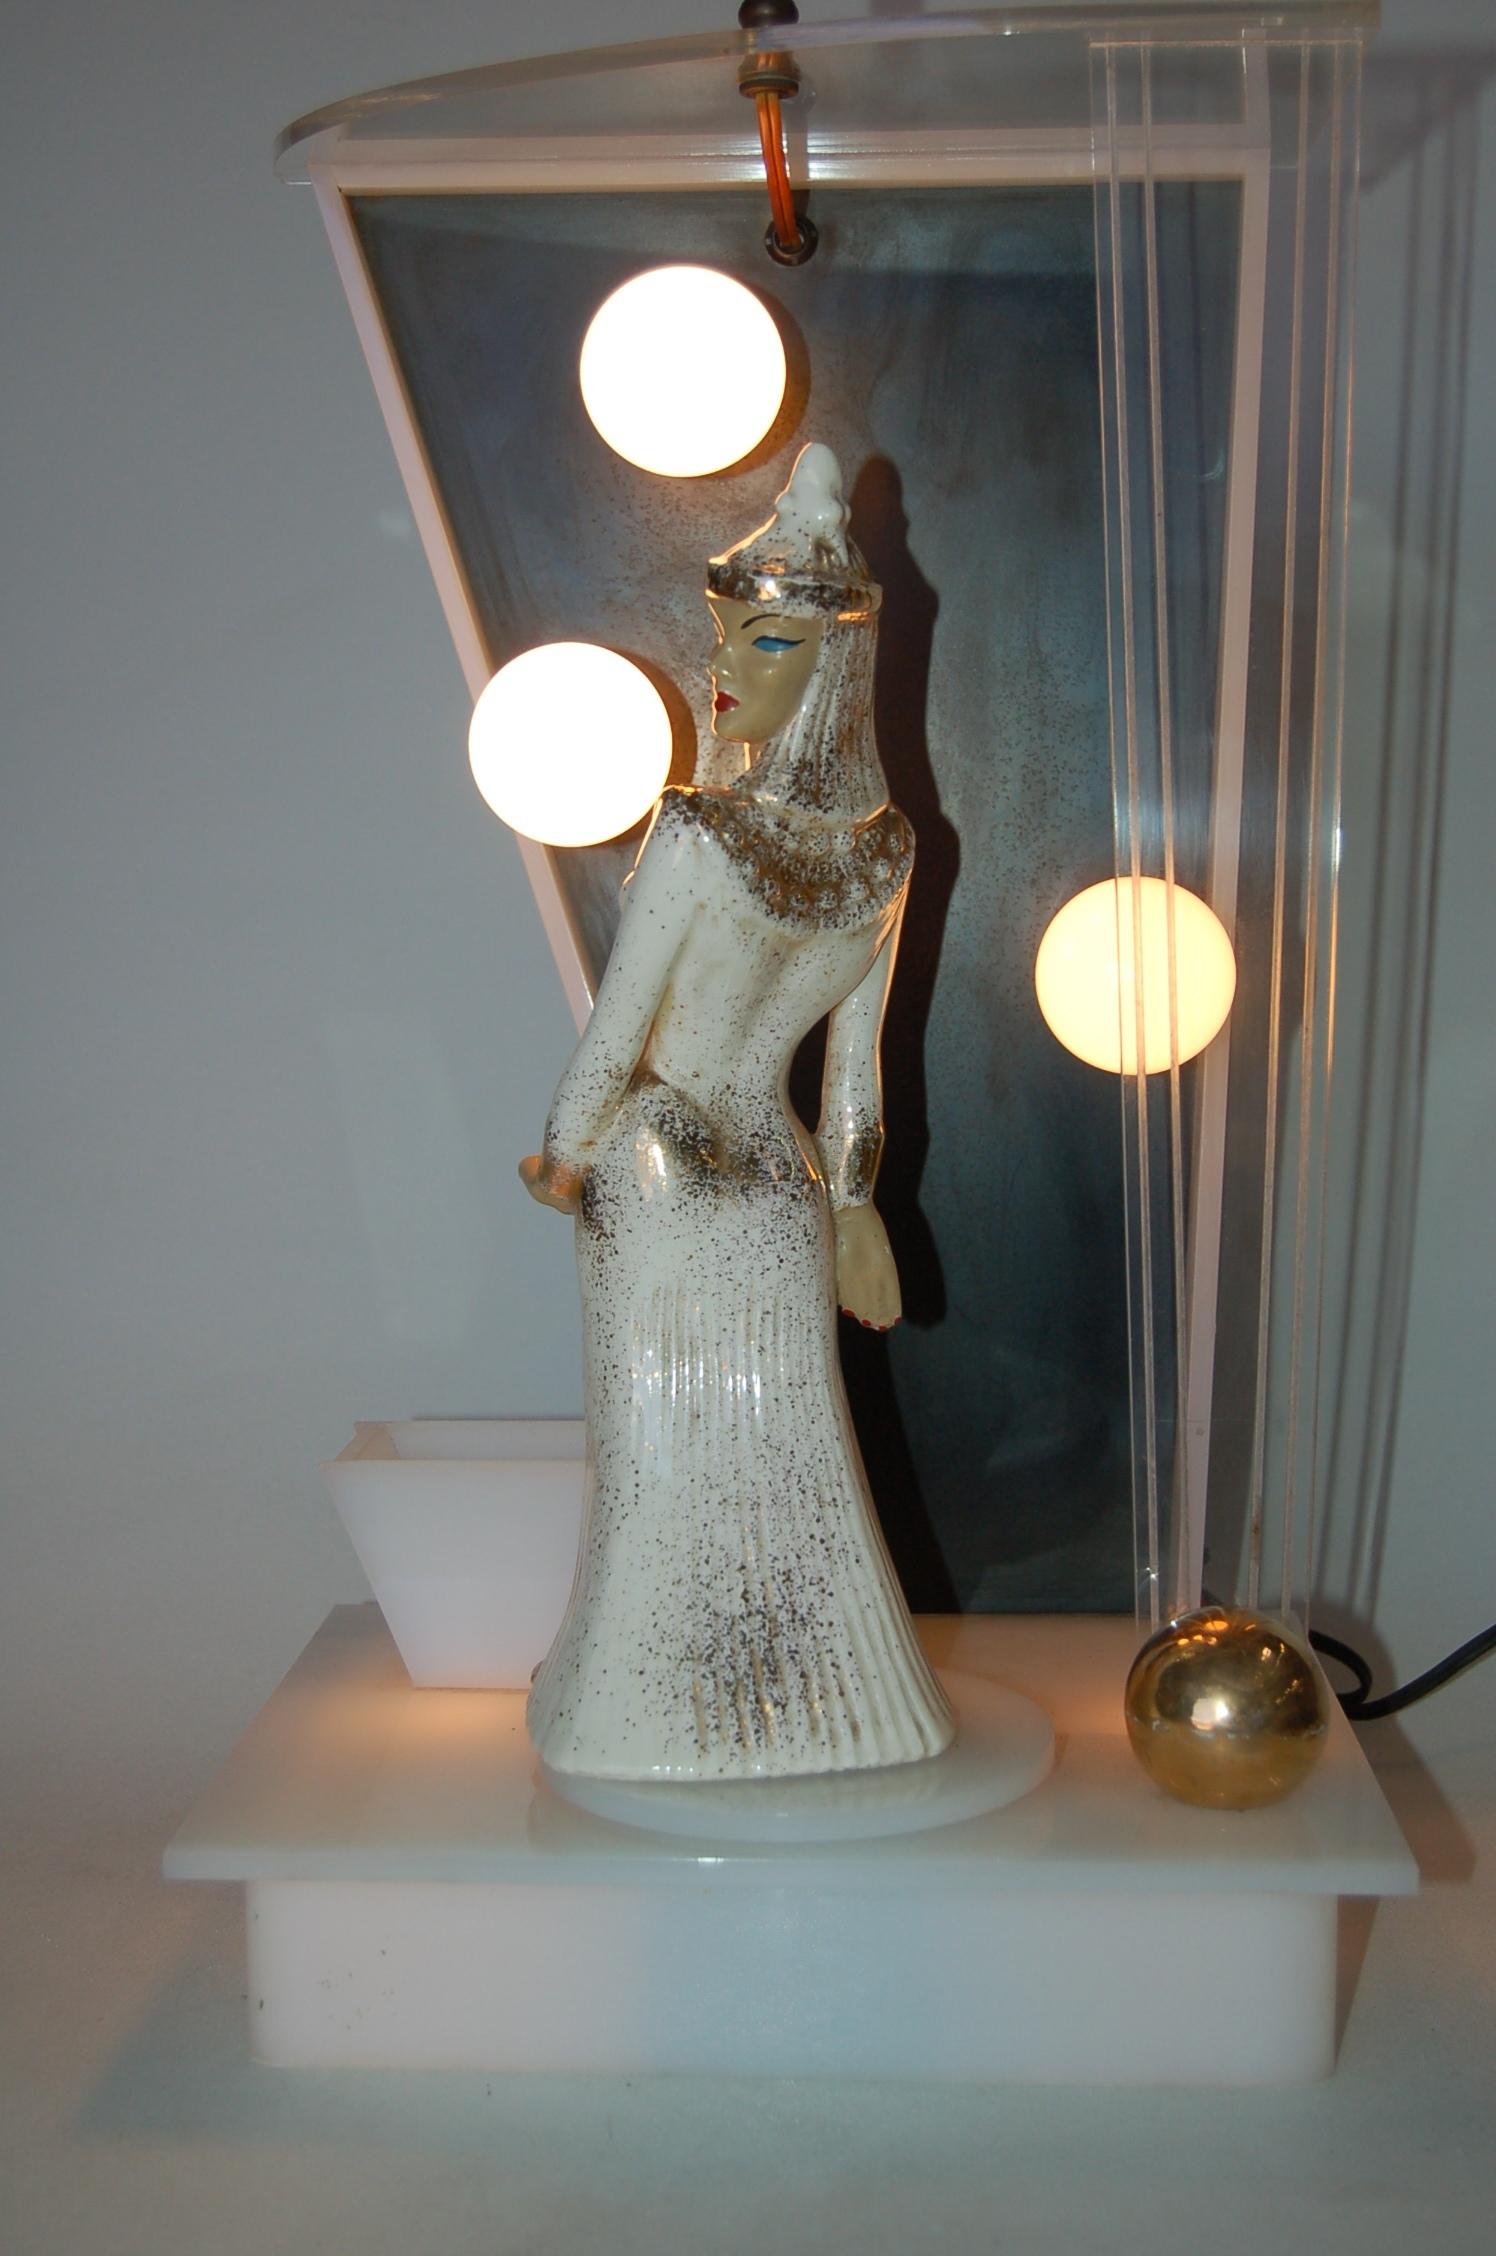 Mid-20th Century Lucite Table Lamp by Moss Lighting with Ceramic Figurine by Hedi Schoop For Sale